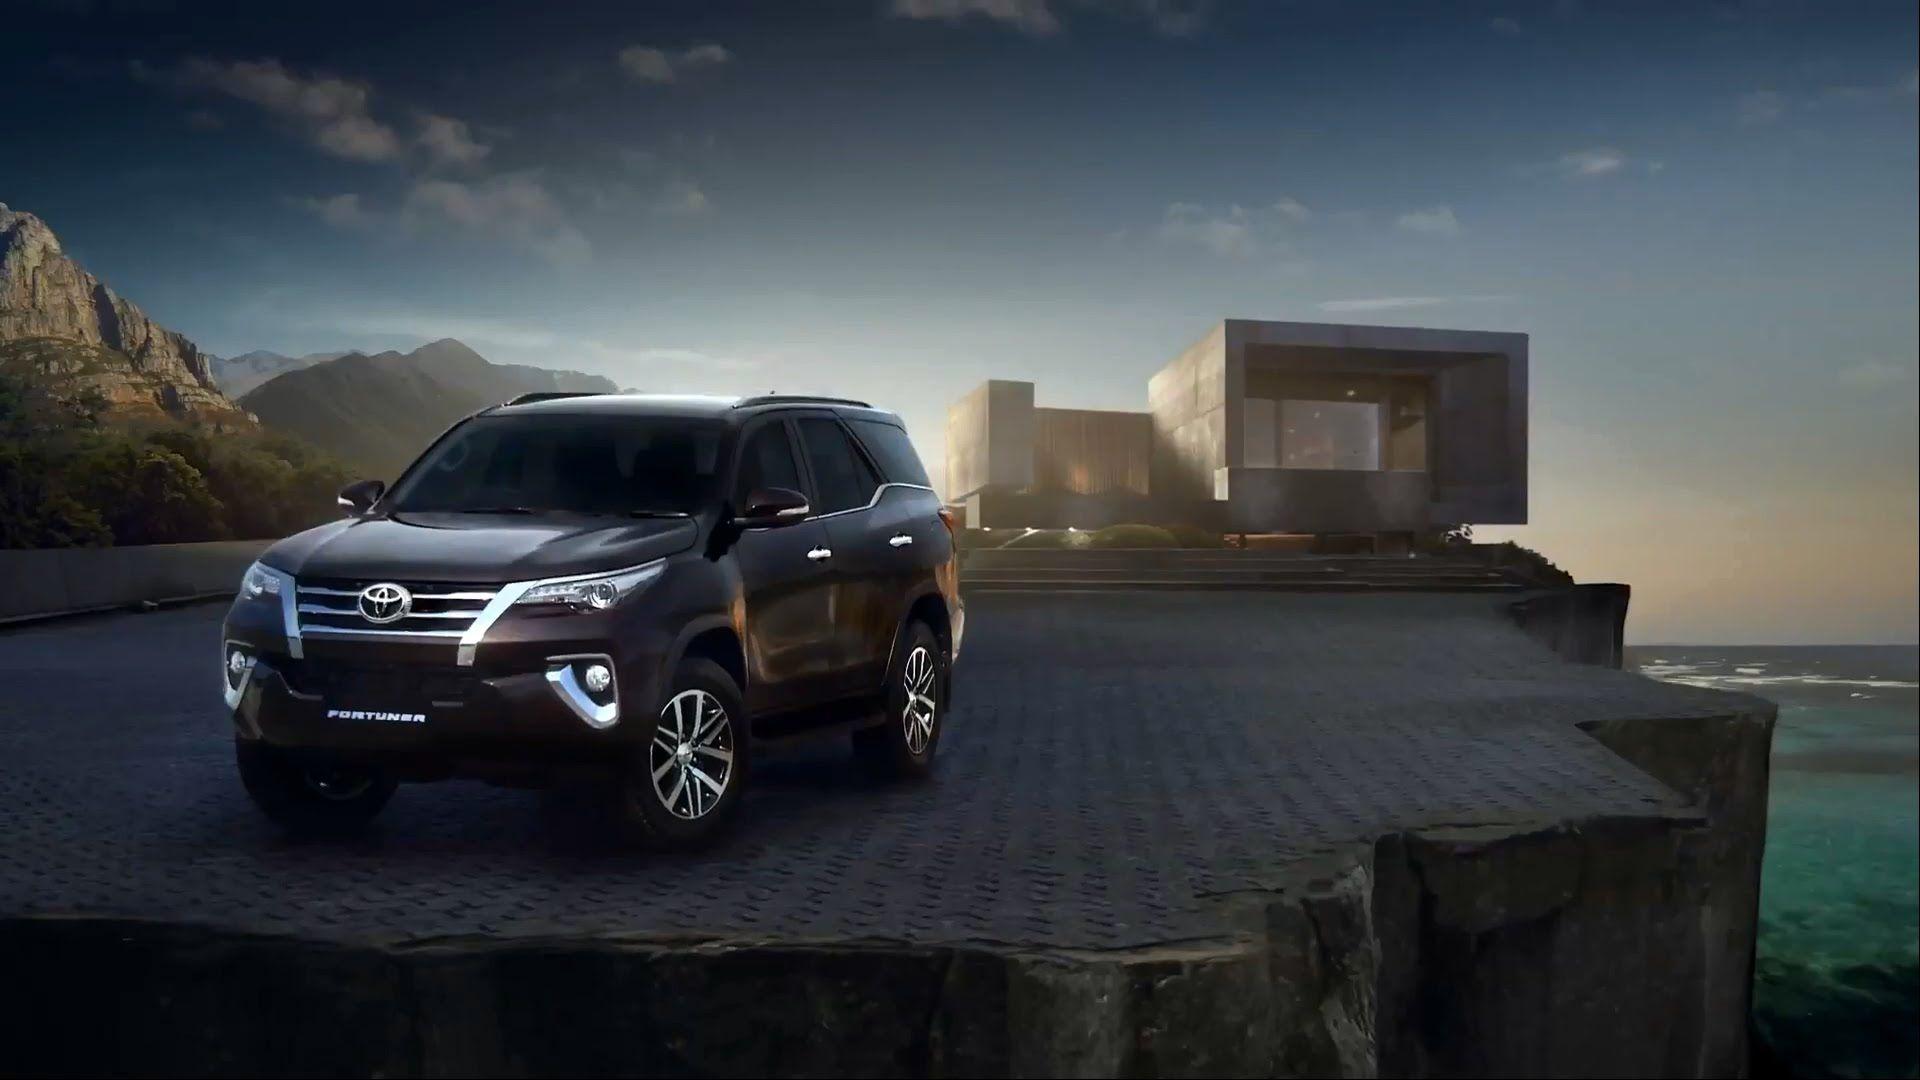 Cool Toyota Fortuner 2016 HD Wallpaper. Ambition